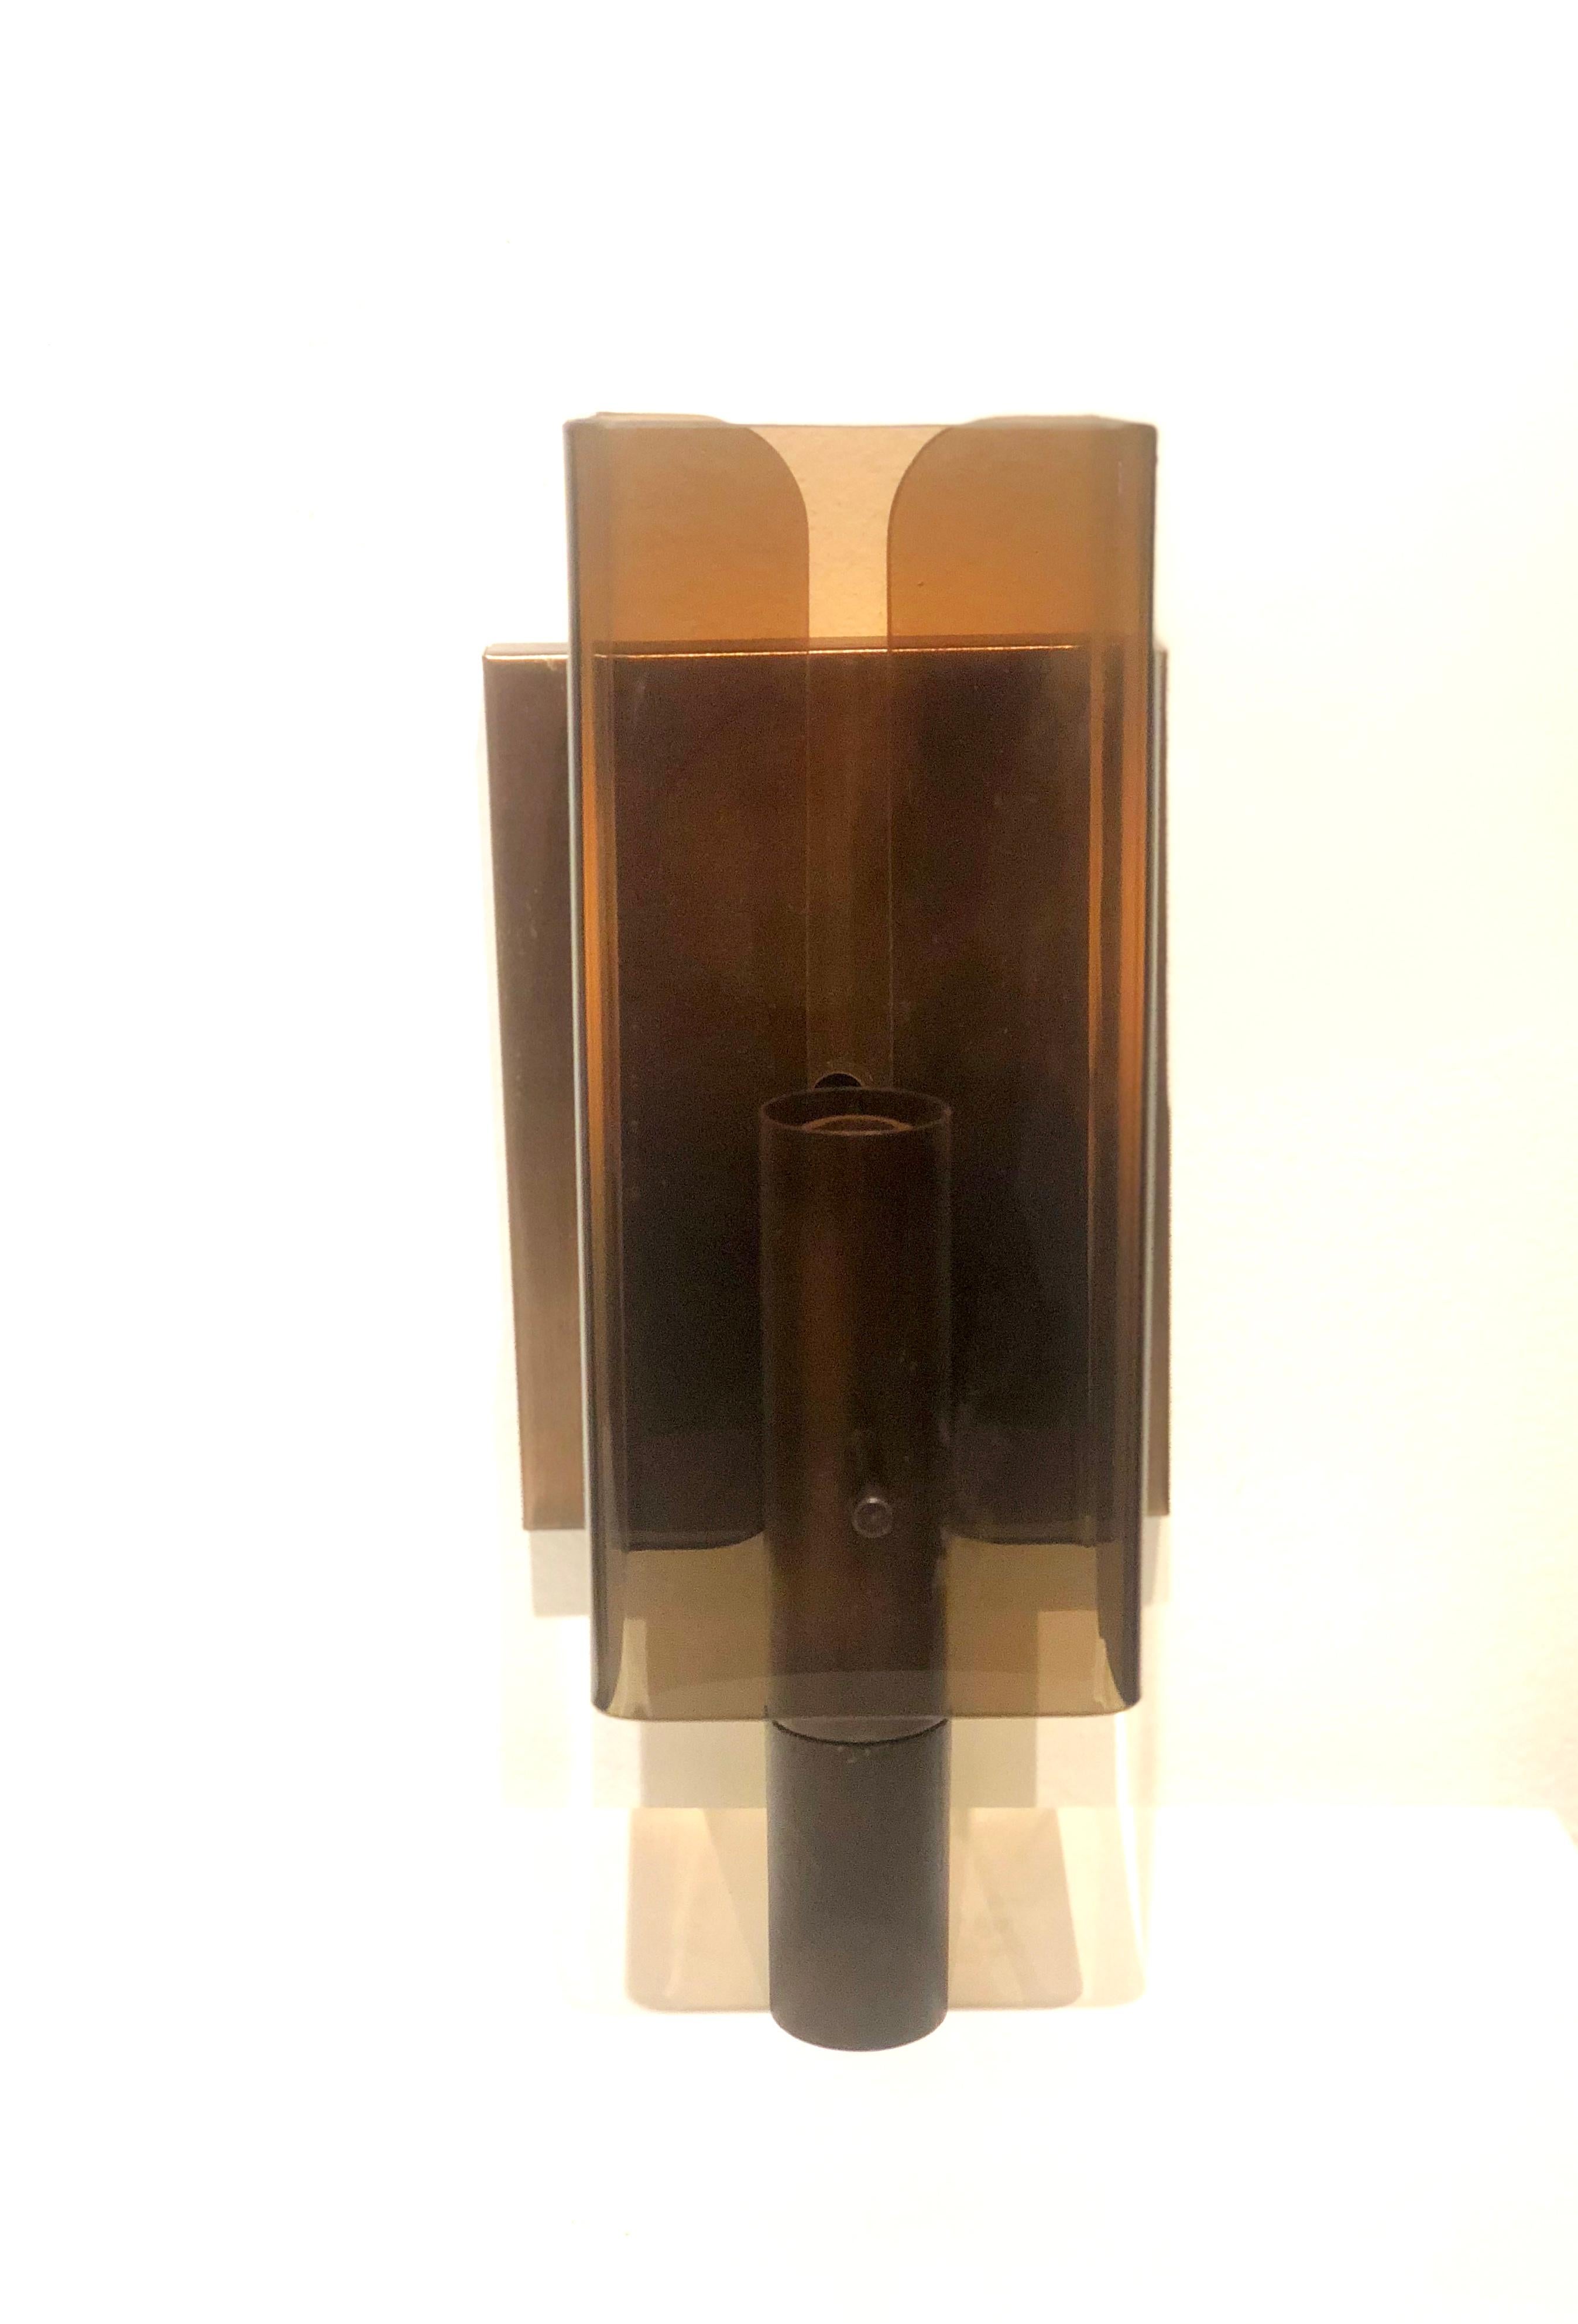 American Space Age Pair of Wall Sconces in Smoke Lucite and Copper 1